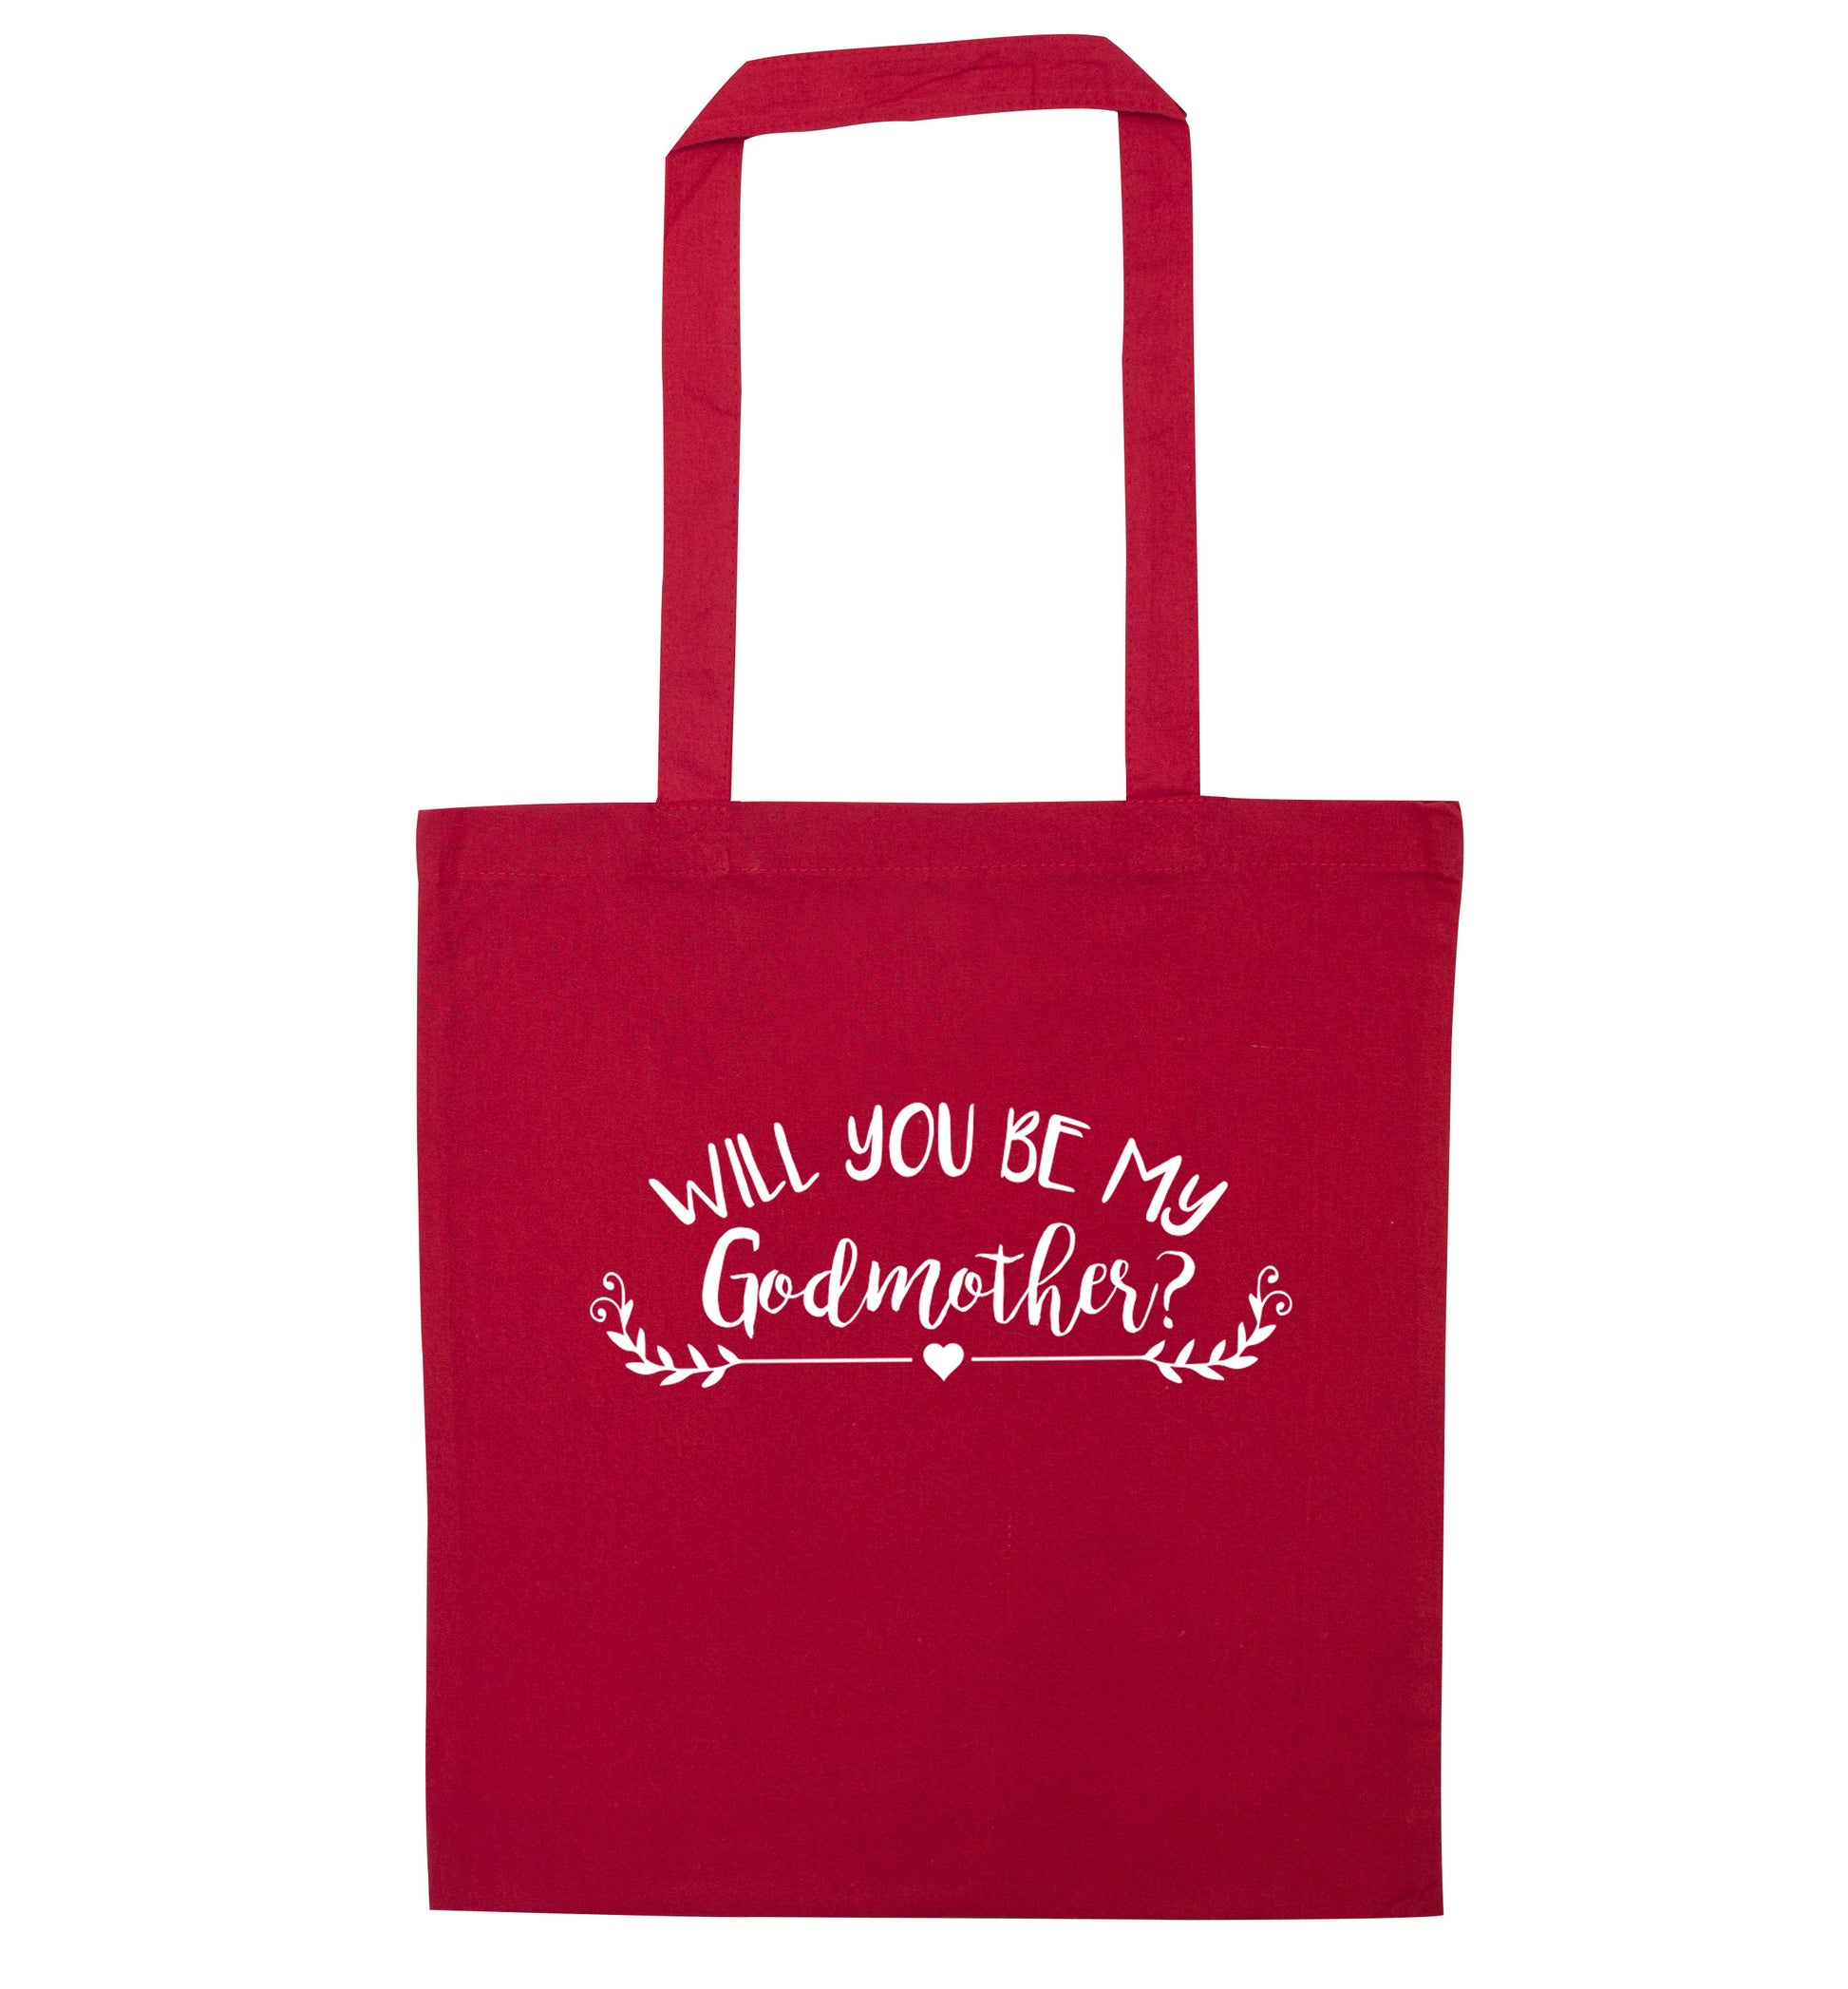 Will you be my godmother? red tote bag